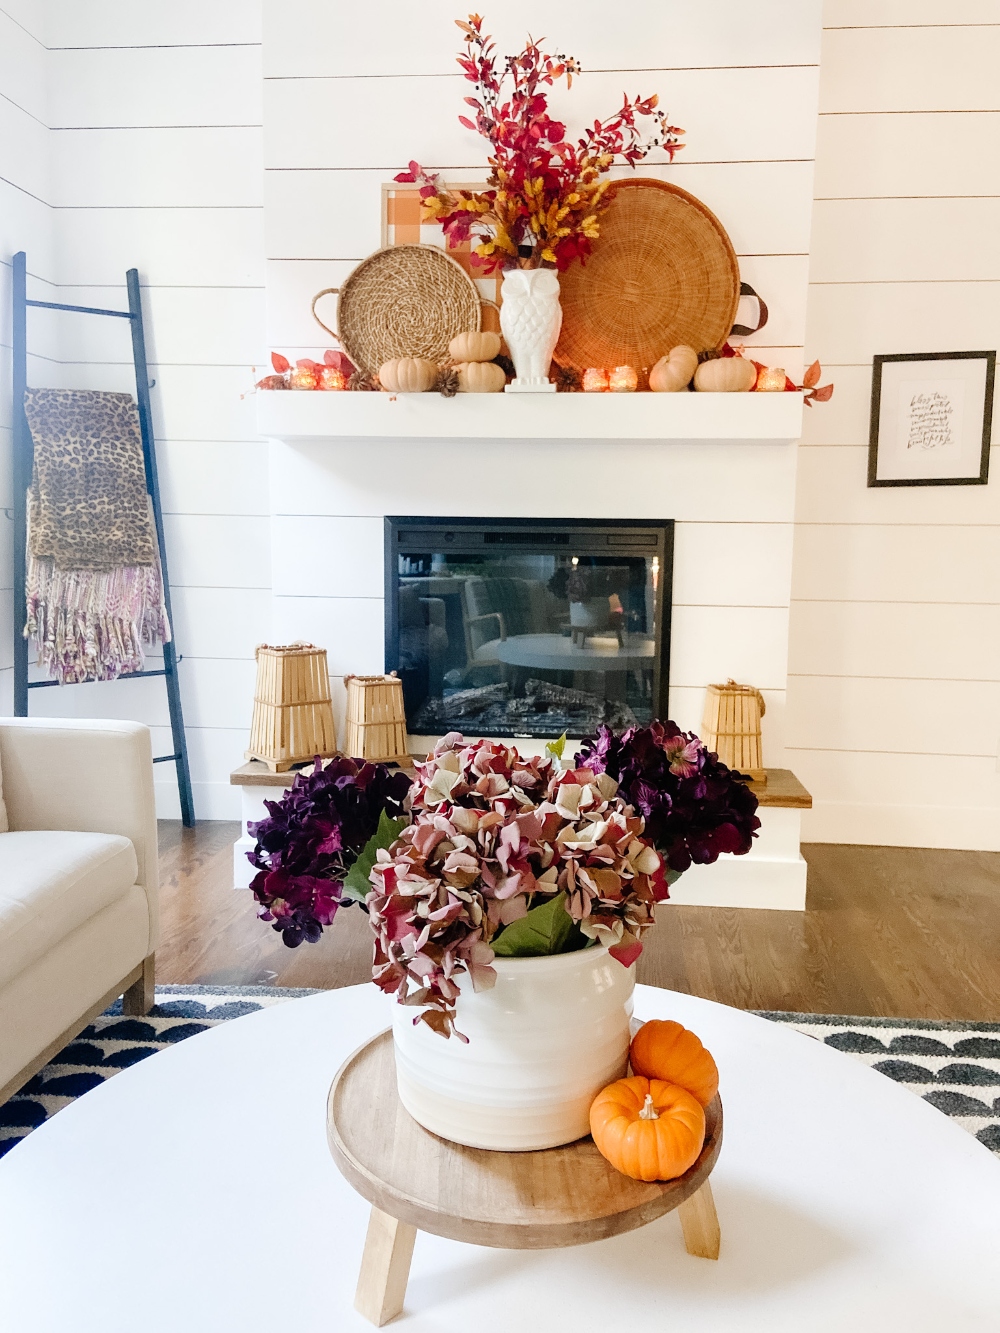 Boho Cottage Fall Decorating Ideas. How to add warm and relaxing fall touches to your home with a few DIY projects and decorating ideas!